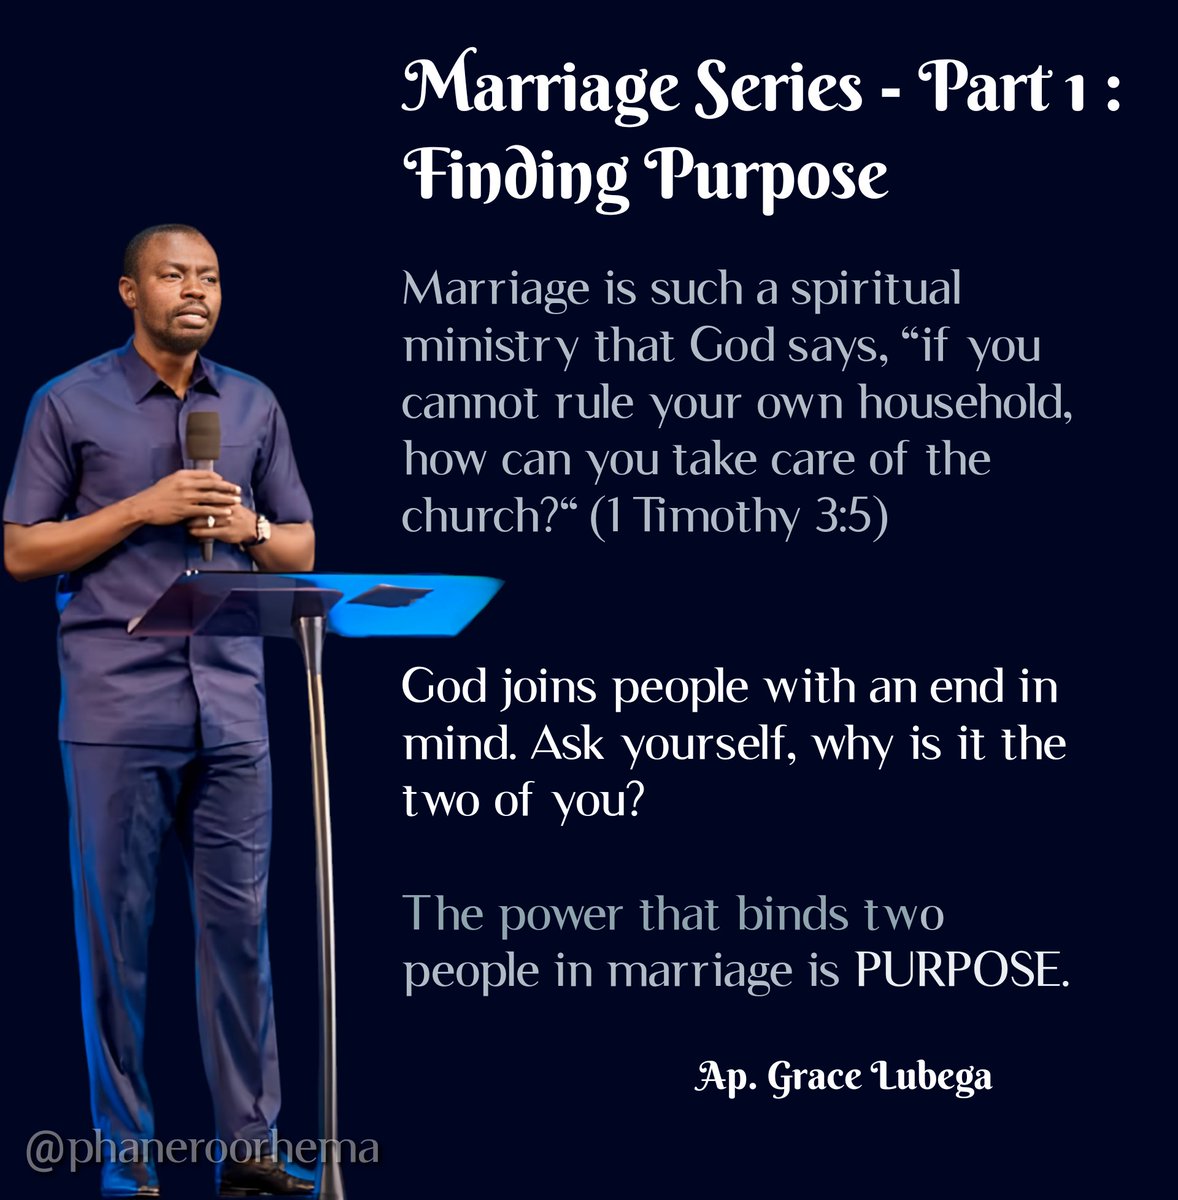 Marriage Series - Part 1 : Finding Purpose 

Marriage is such a spiritual ministry that God says, 'if you cannot rule your own household, how can you take care of the church?' (1 Timothy 3:5)

Ap. Grace Lubega
#PhanerooRhema
#MyGreatPriceVI
#PhanerooApp